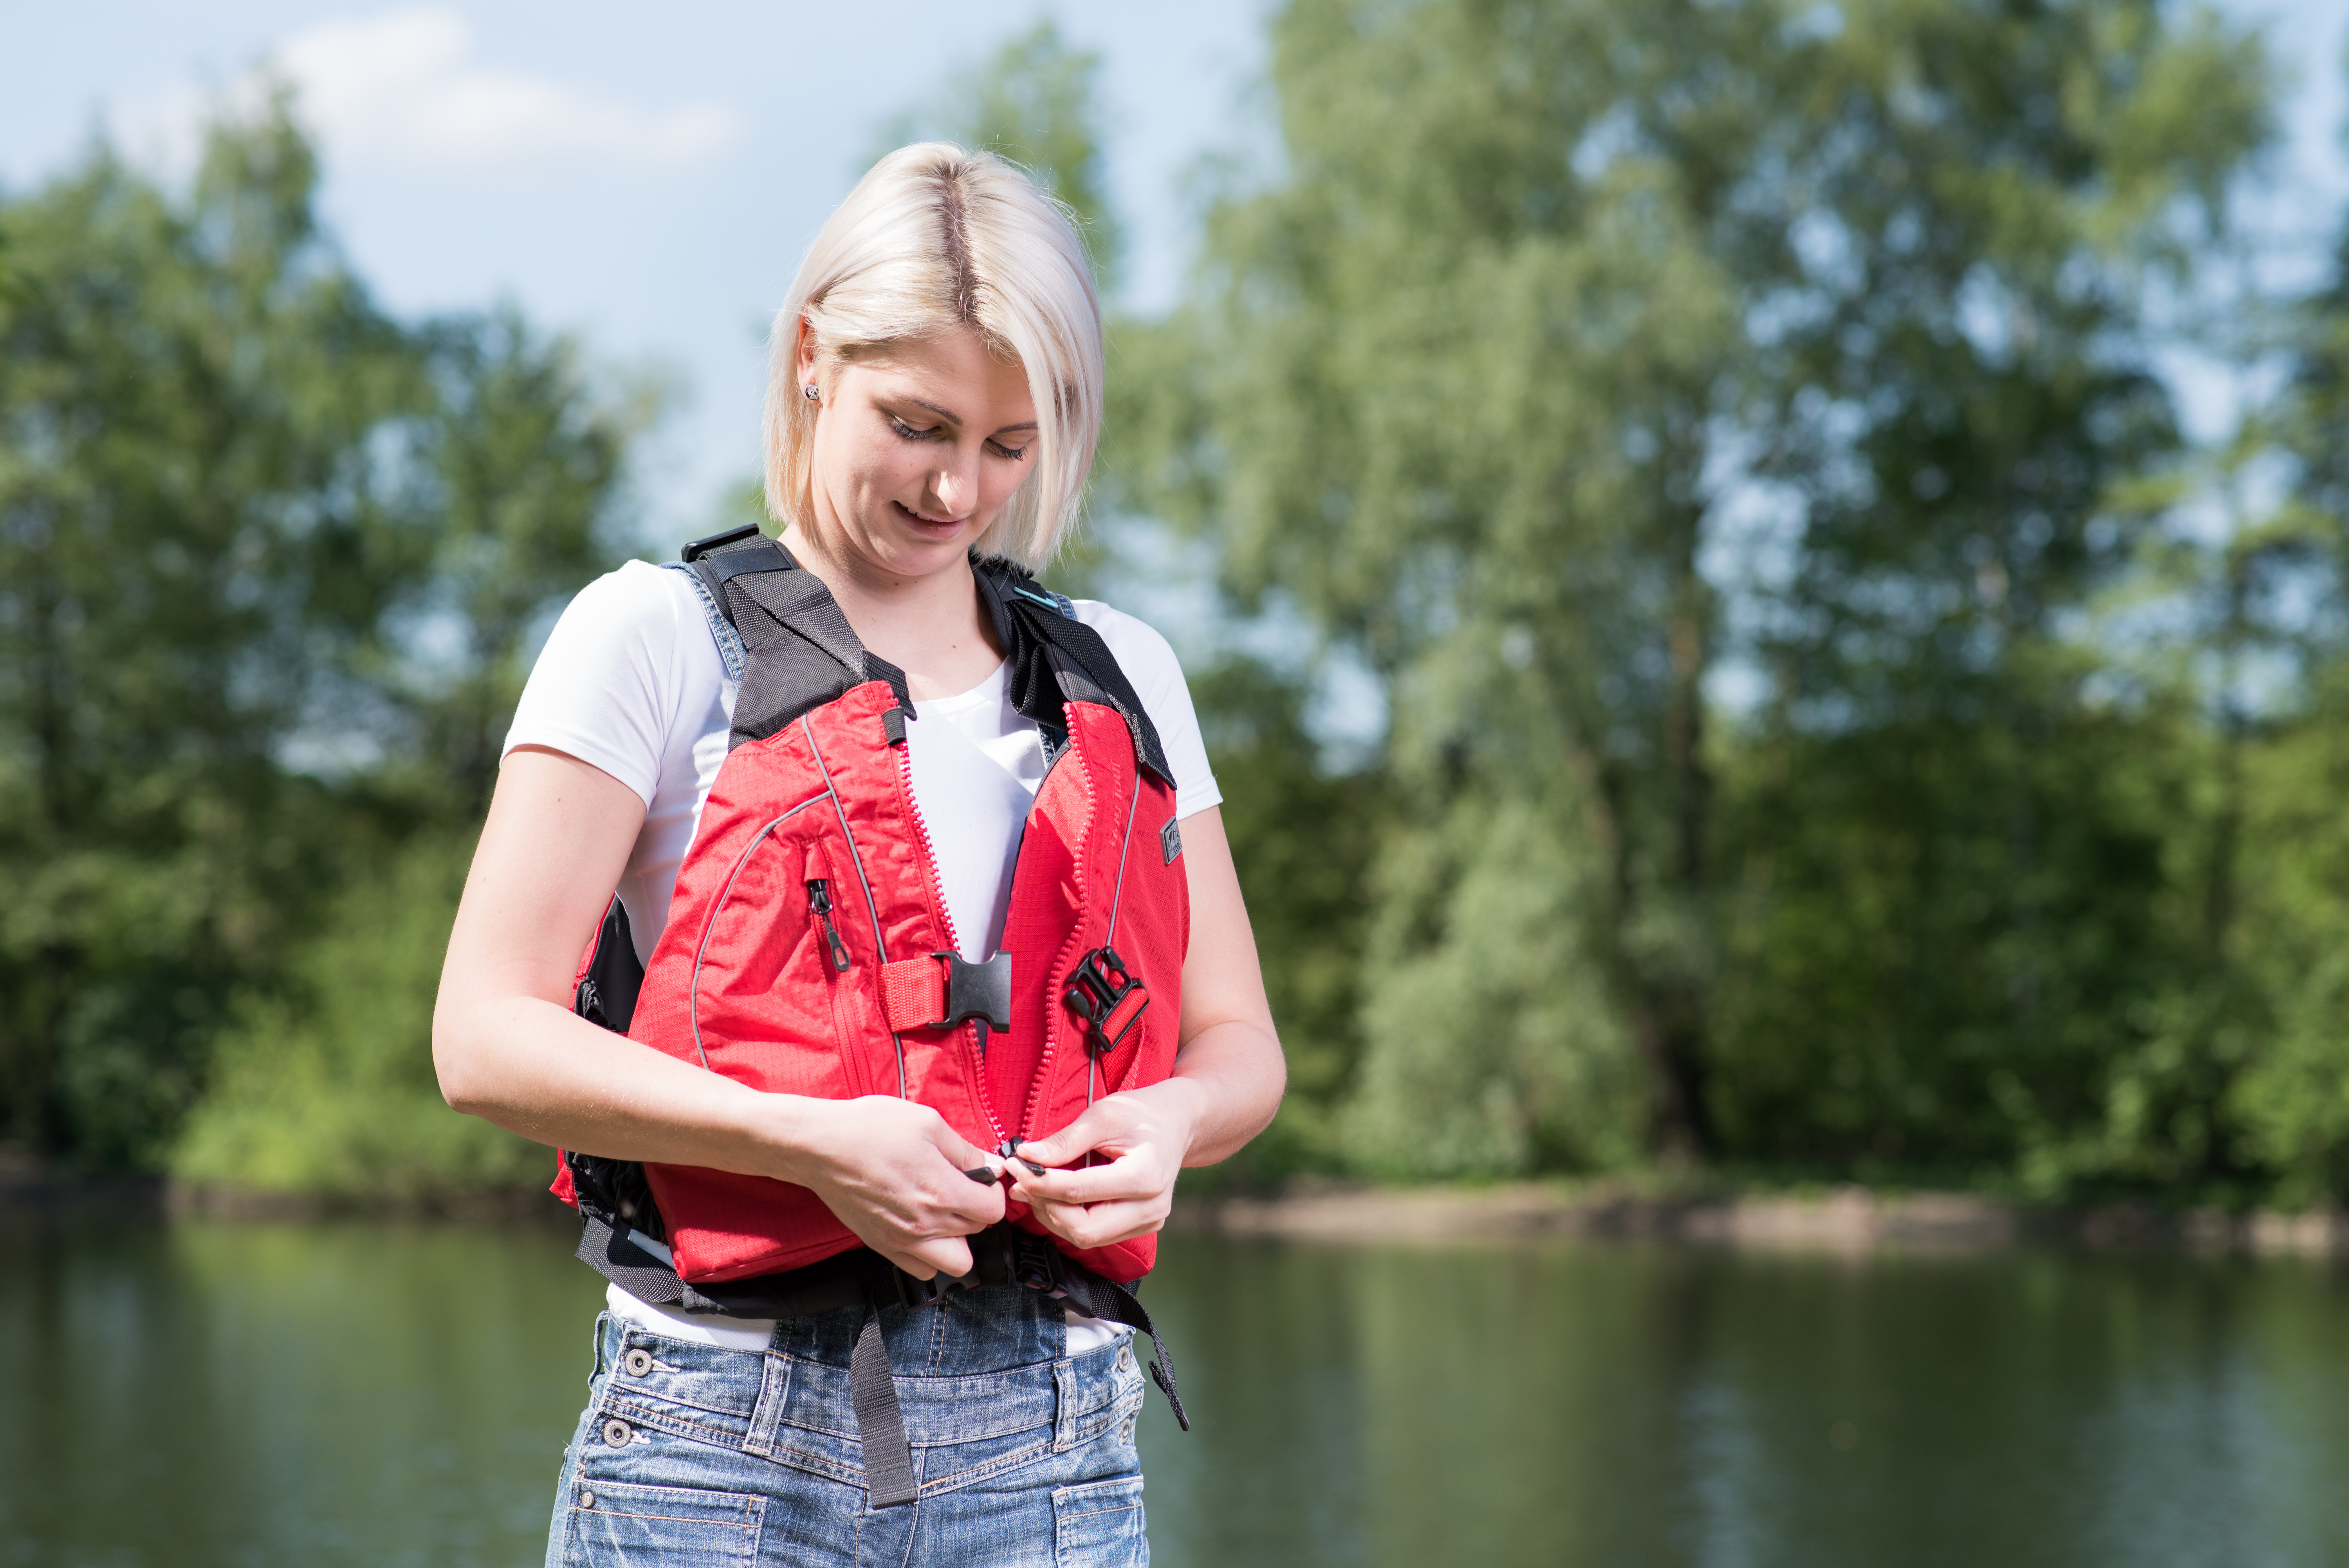 A woman wears and fastens a lifejacket, canoe lifejacket concept. 